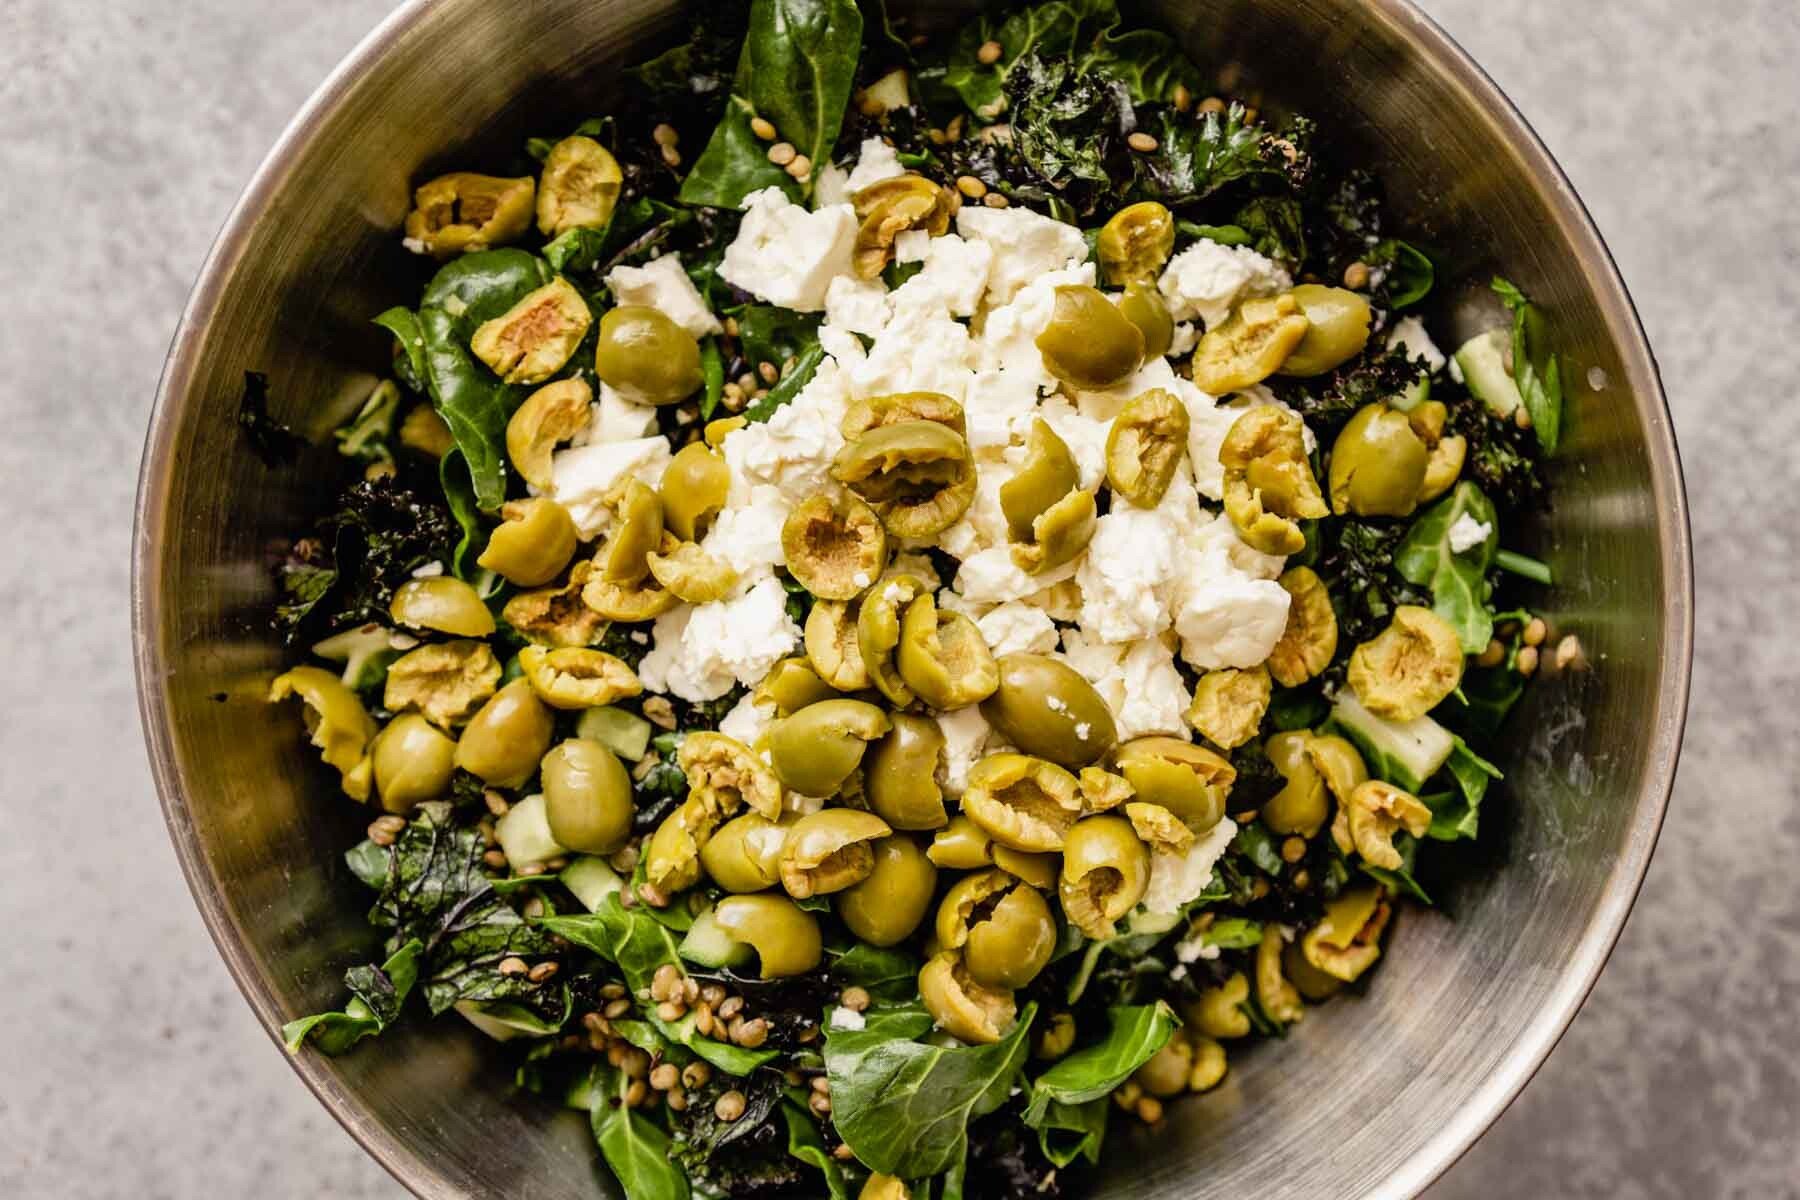 Large mixing bowl filled with swiss chard and kale topped with cooked lentils, olives and crumbled feta. 